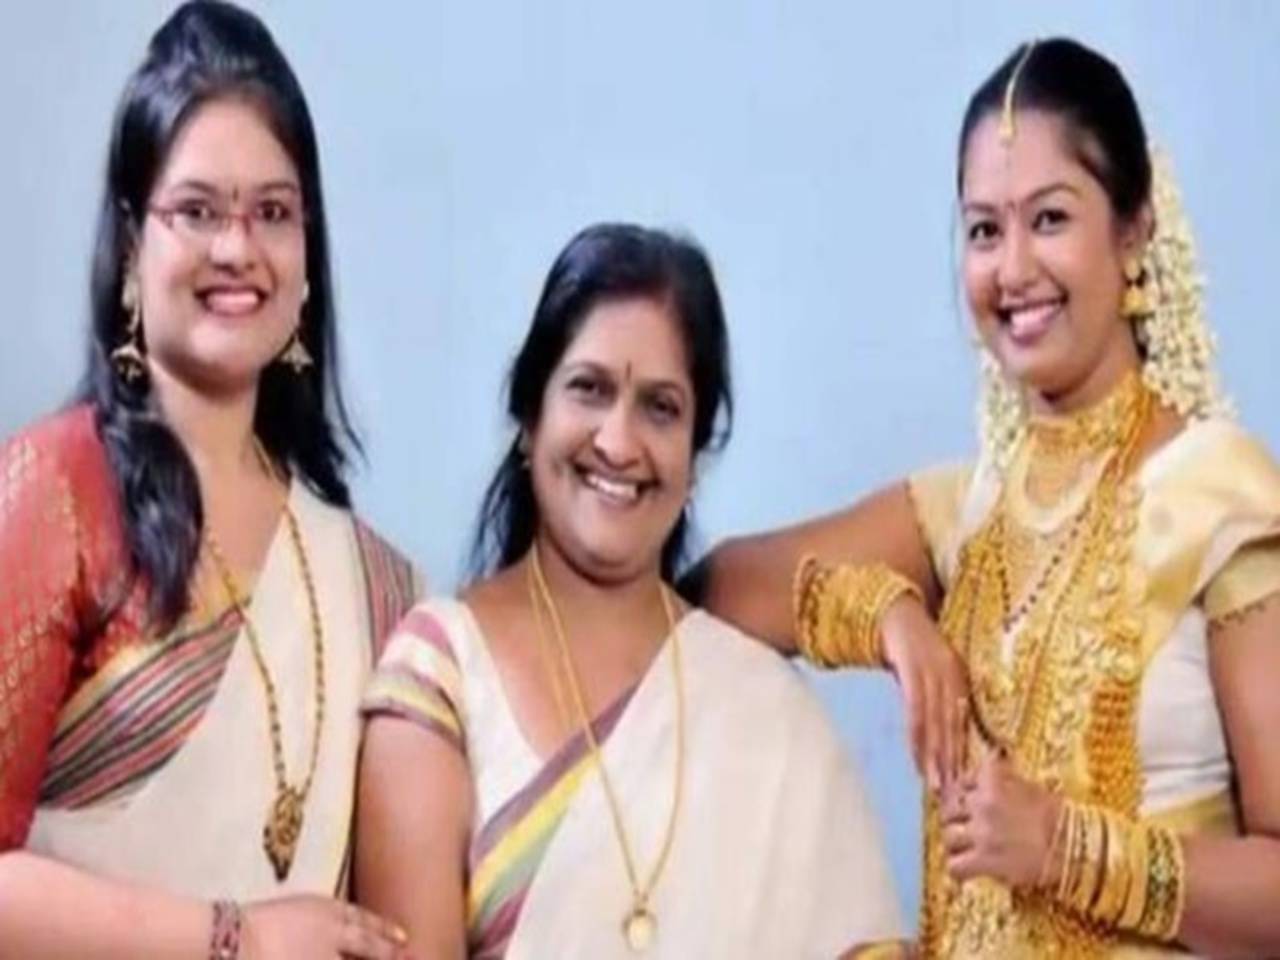 Malayalam TV actress fake currency case: Two more arrested - Times of India